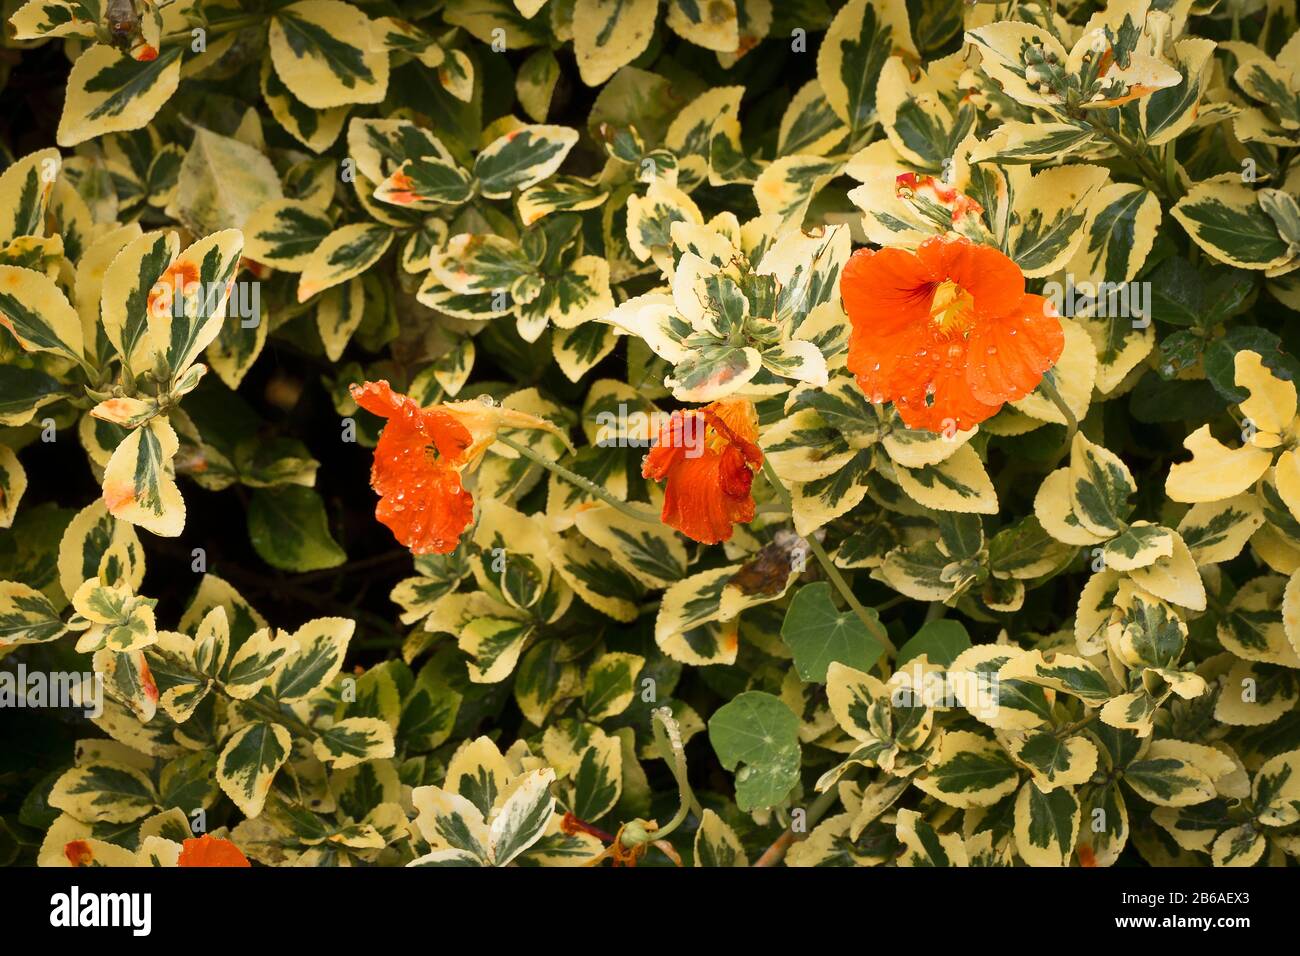 A surprise appearance of self-seeded flowering nasturtiums scrambling through an ornamental Euonymus Emerald and Gold variegated leafed shrub Stock Photo